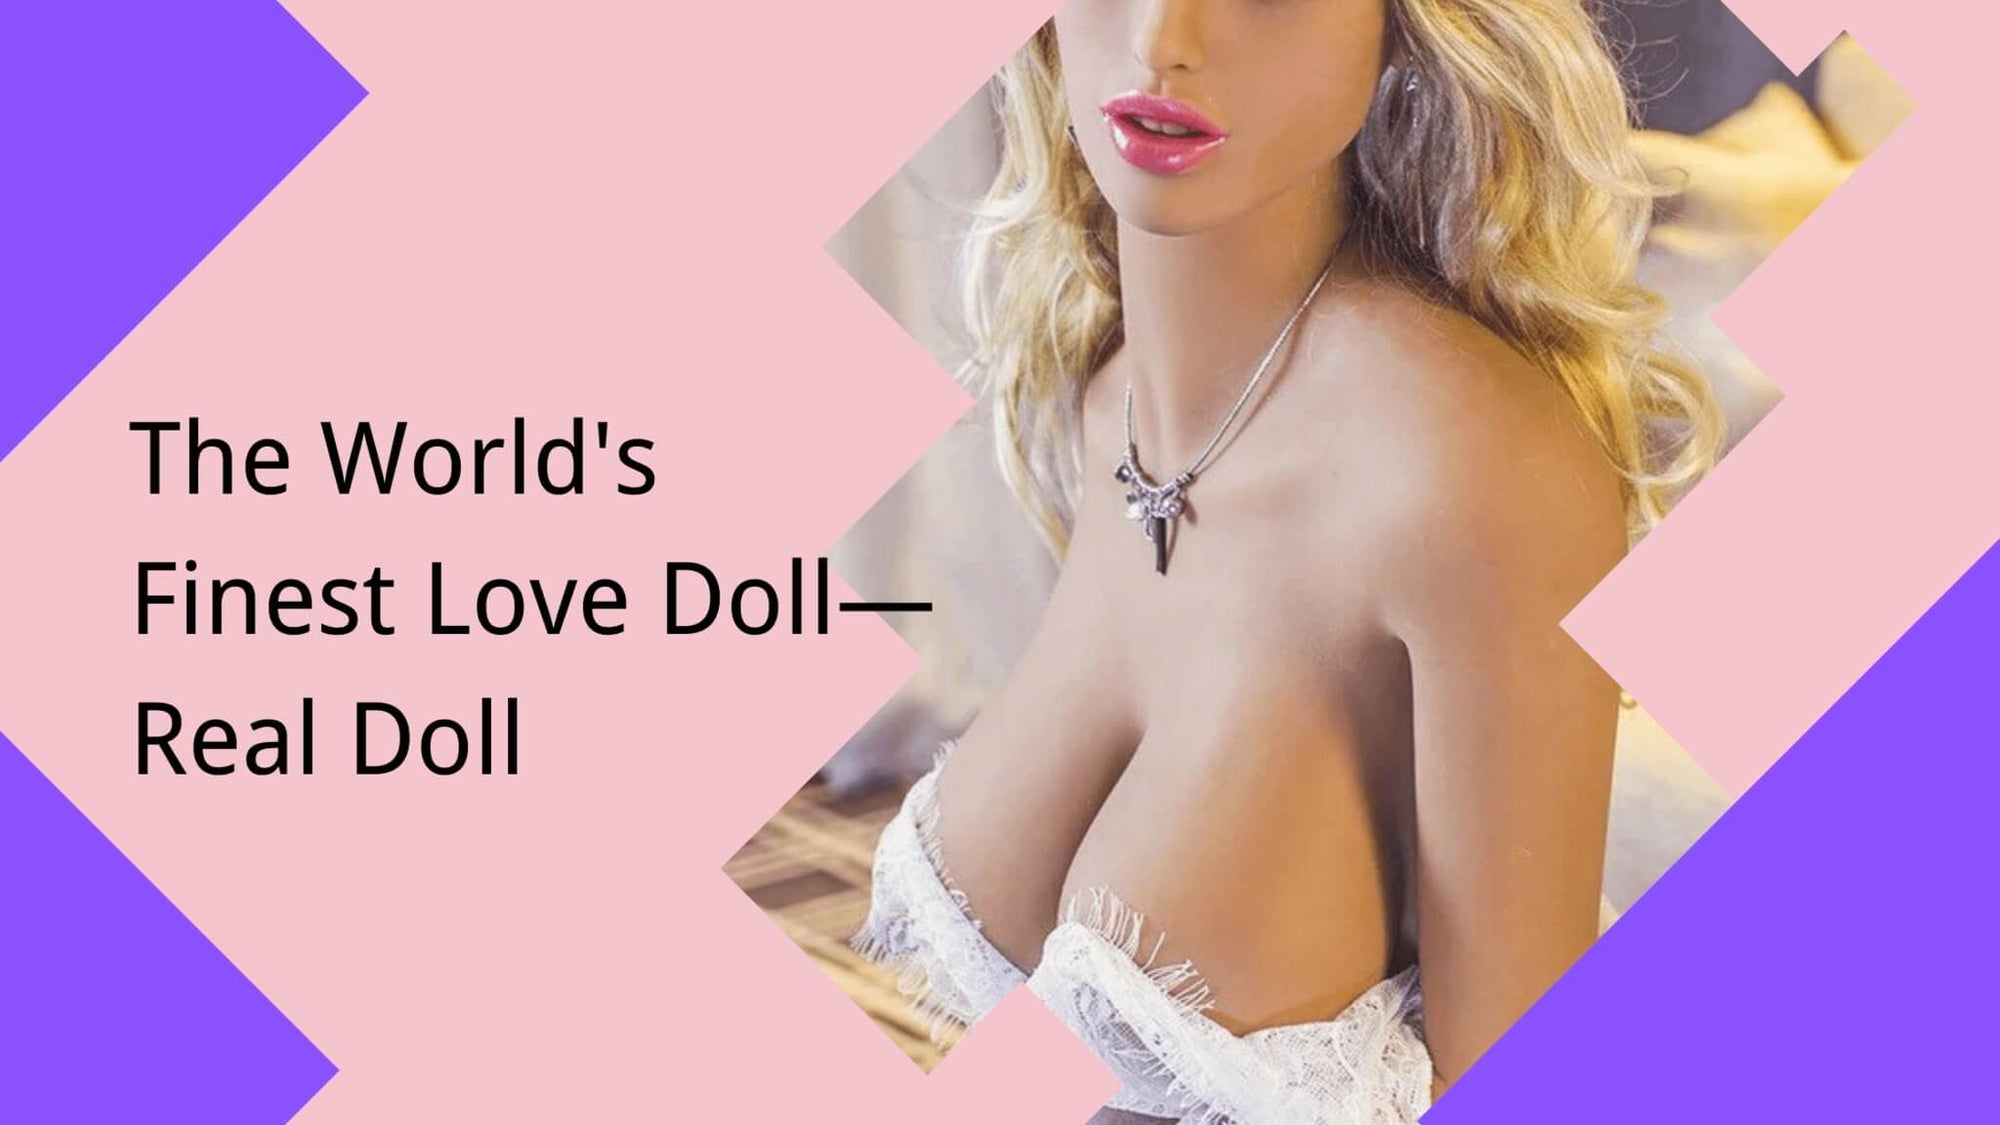 The World's Finest Love Doll—Real Doll